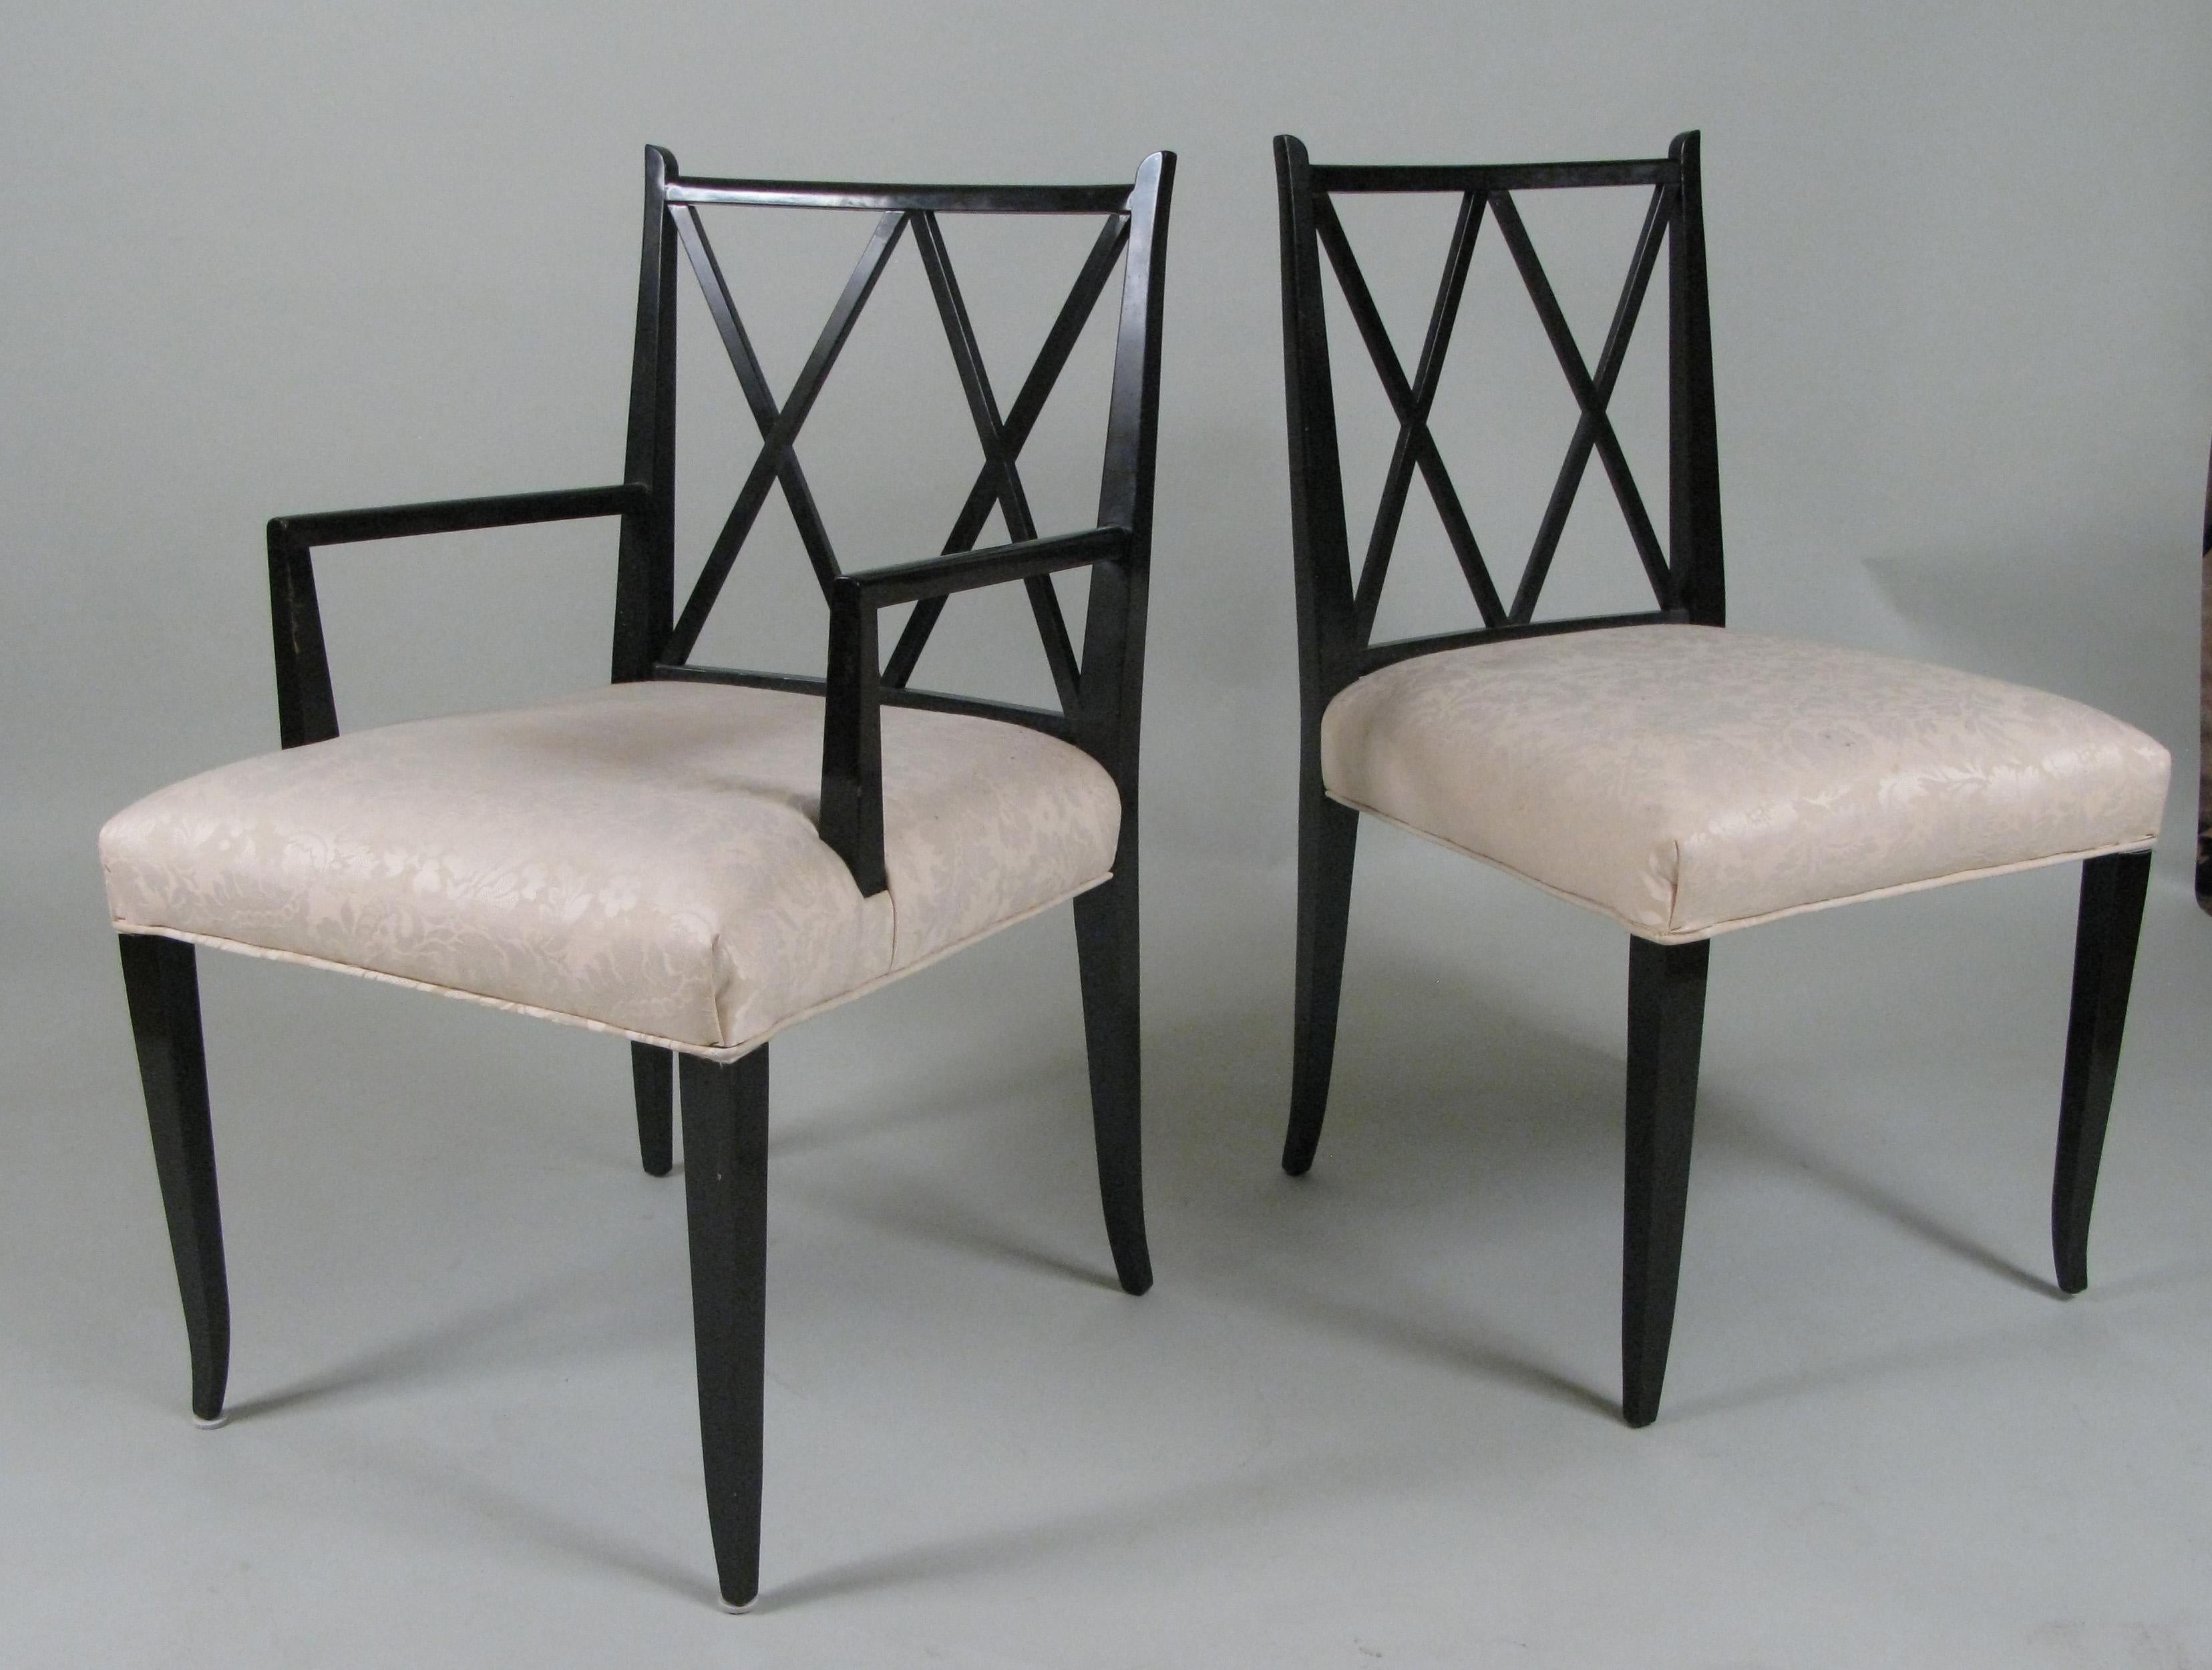 American Set of Six 'Double X' Dining Chairs by Tommi Parzinger for Parzinger Originals